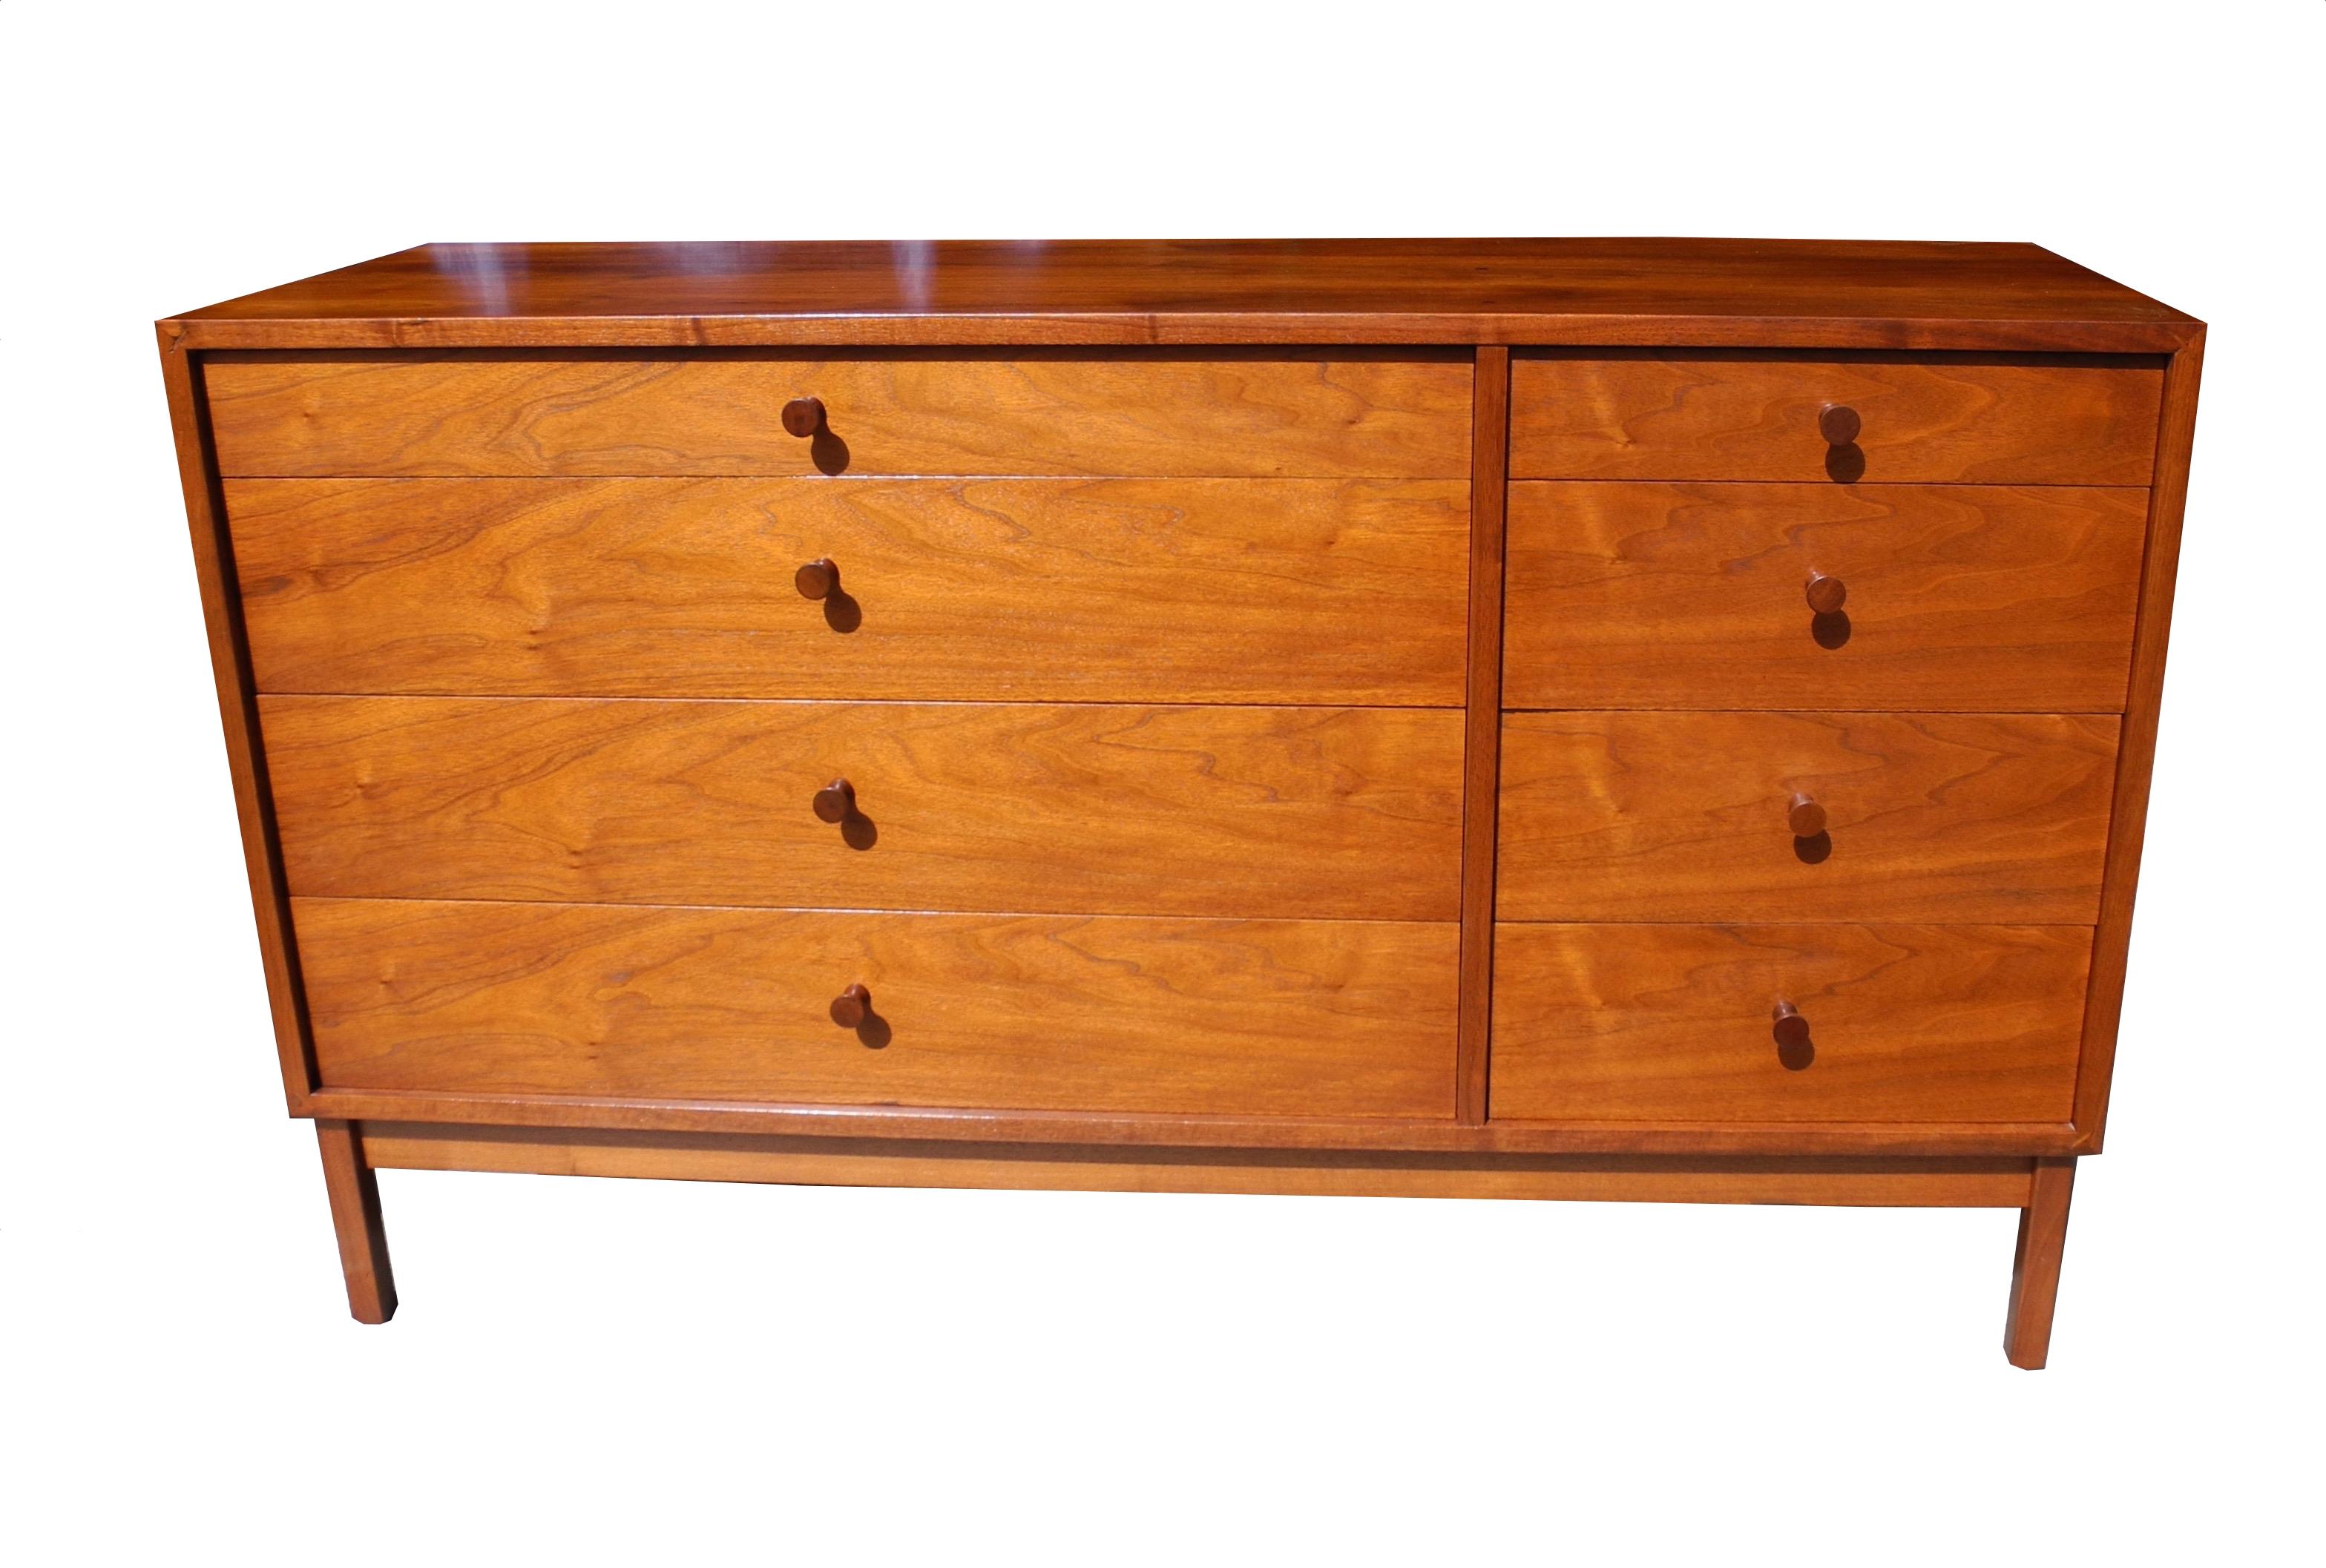 This beautiful Mid-Century Modern walnut dresser has two banks of drawers. One wider and one smaller. Made in the 1950s by artist Richard Artschwager before his notoriety for his art. He made furniture to support himself as a young artist.
 